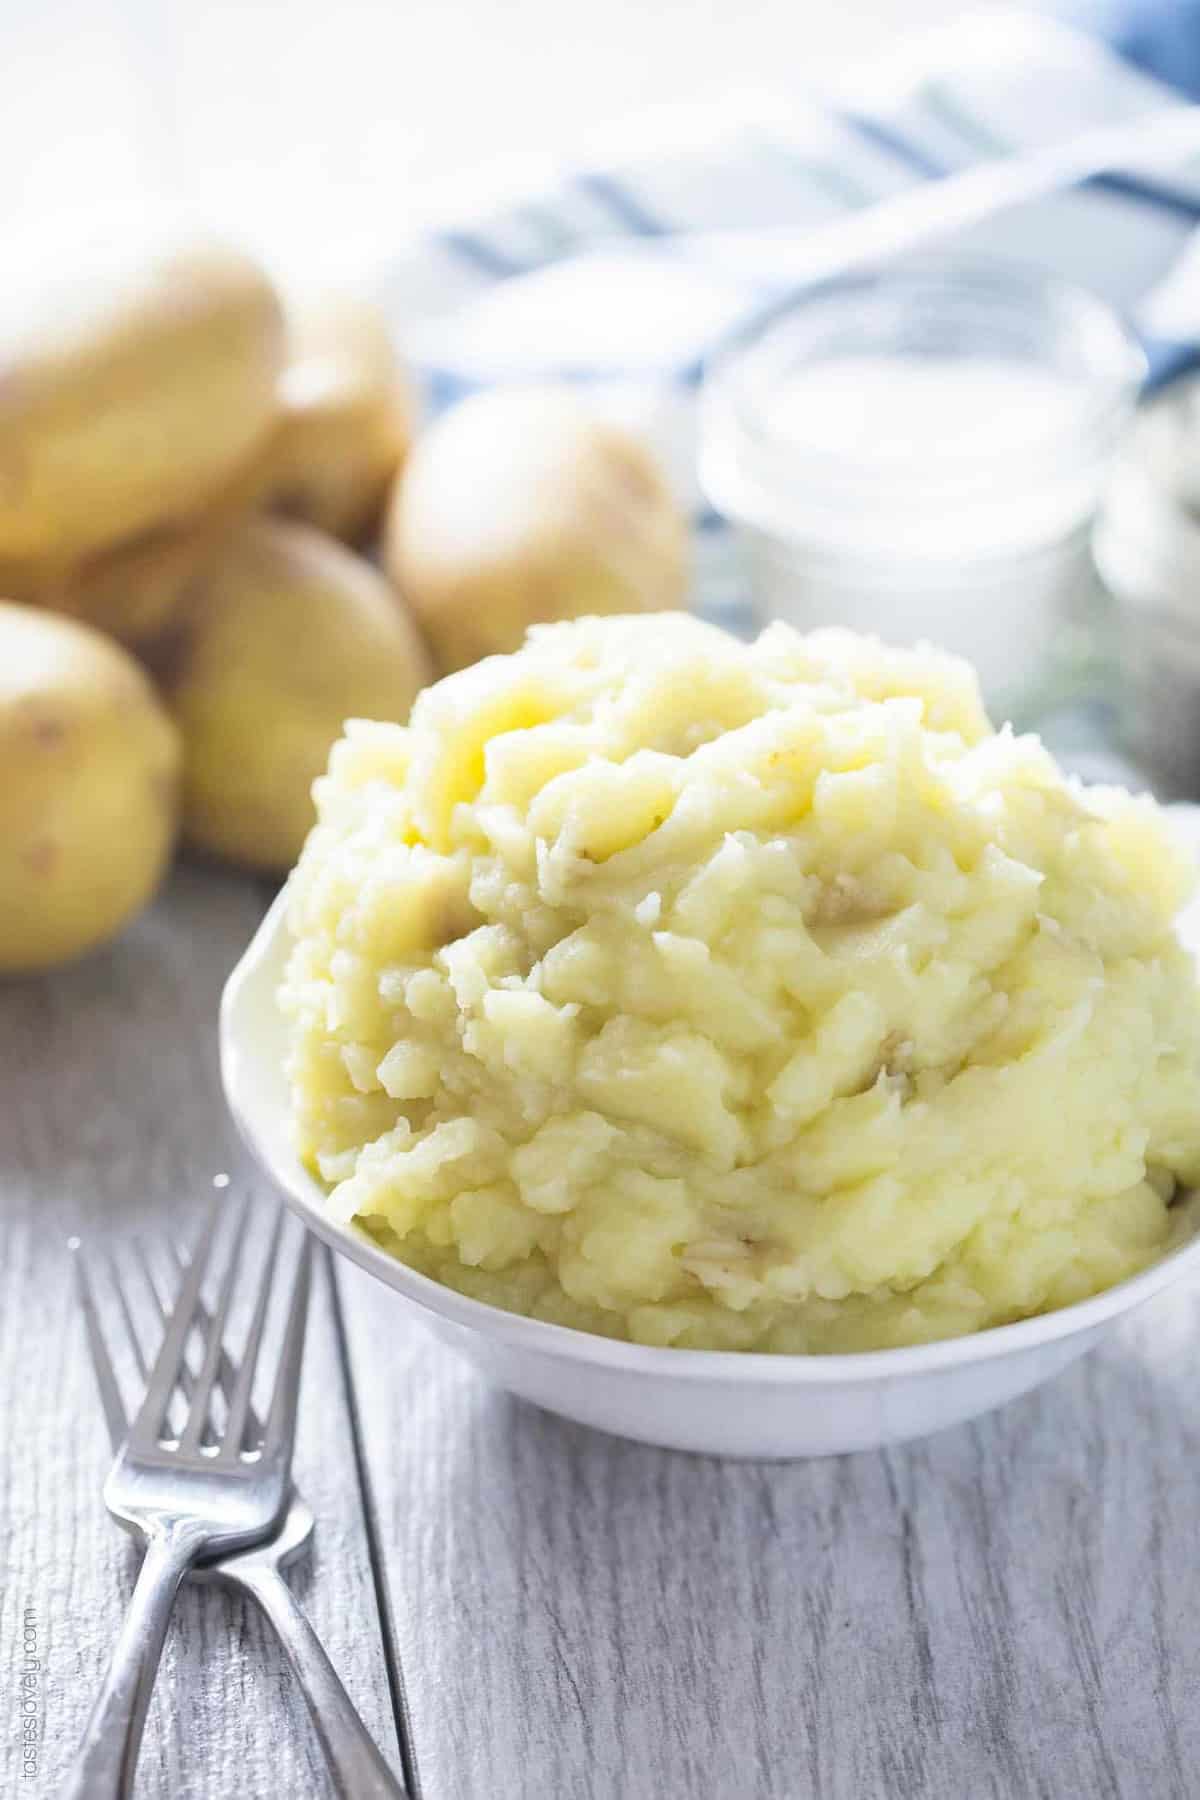 Dairy Free Mashed Potatoes - creamy and delicious with no butter! (gluten free, paleo, Whole30, dairy free)